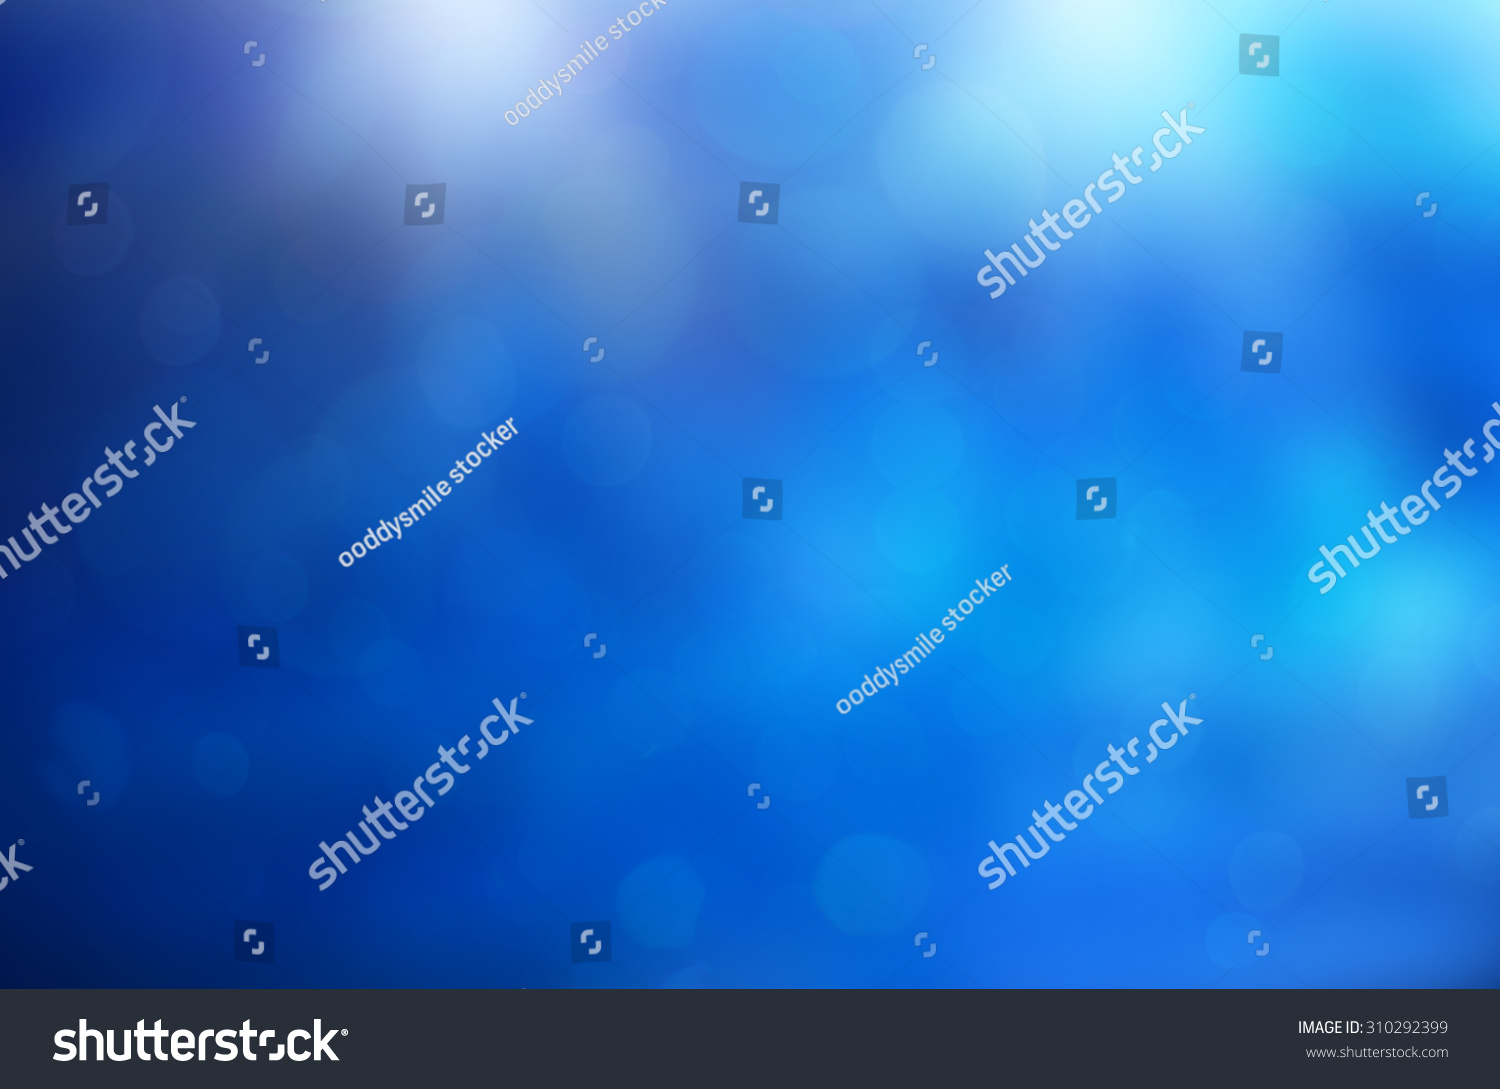 Abstract background #310292399